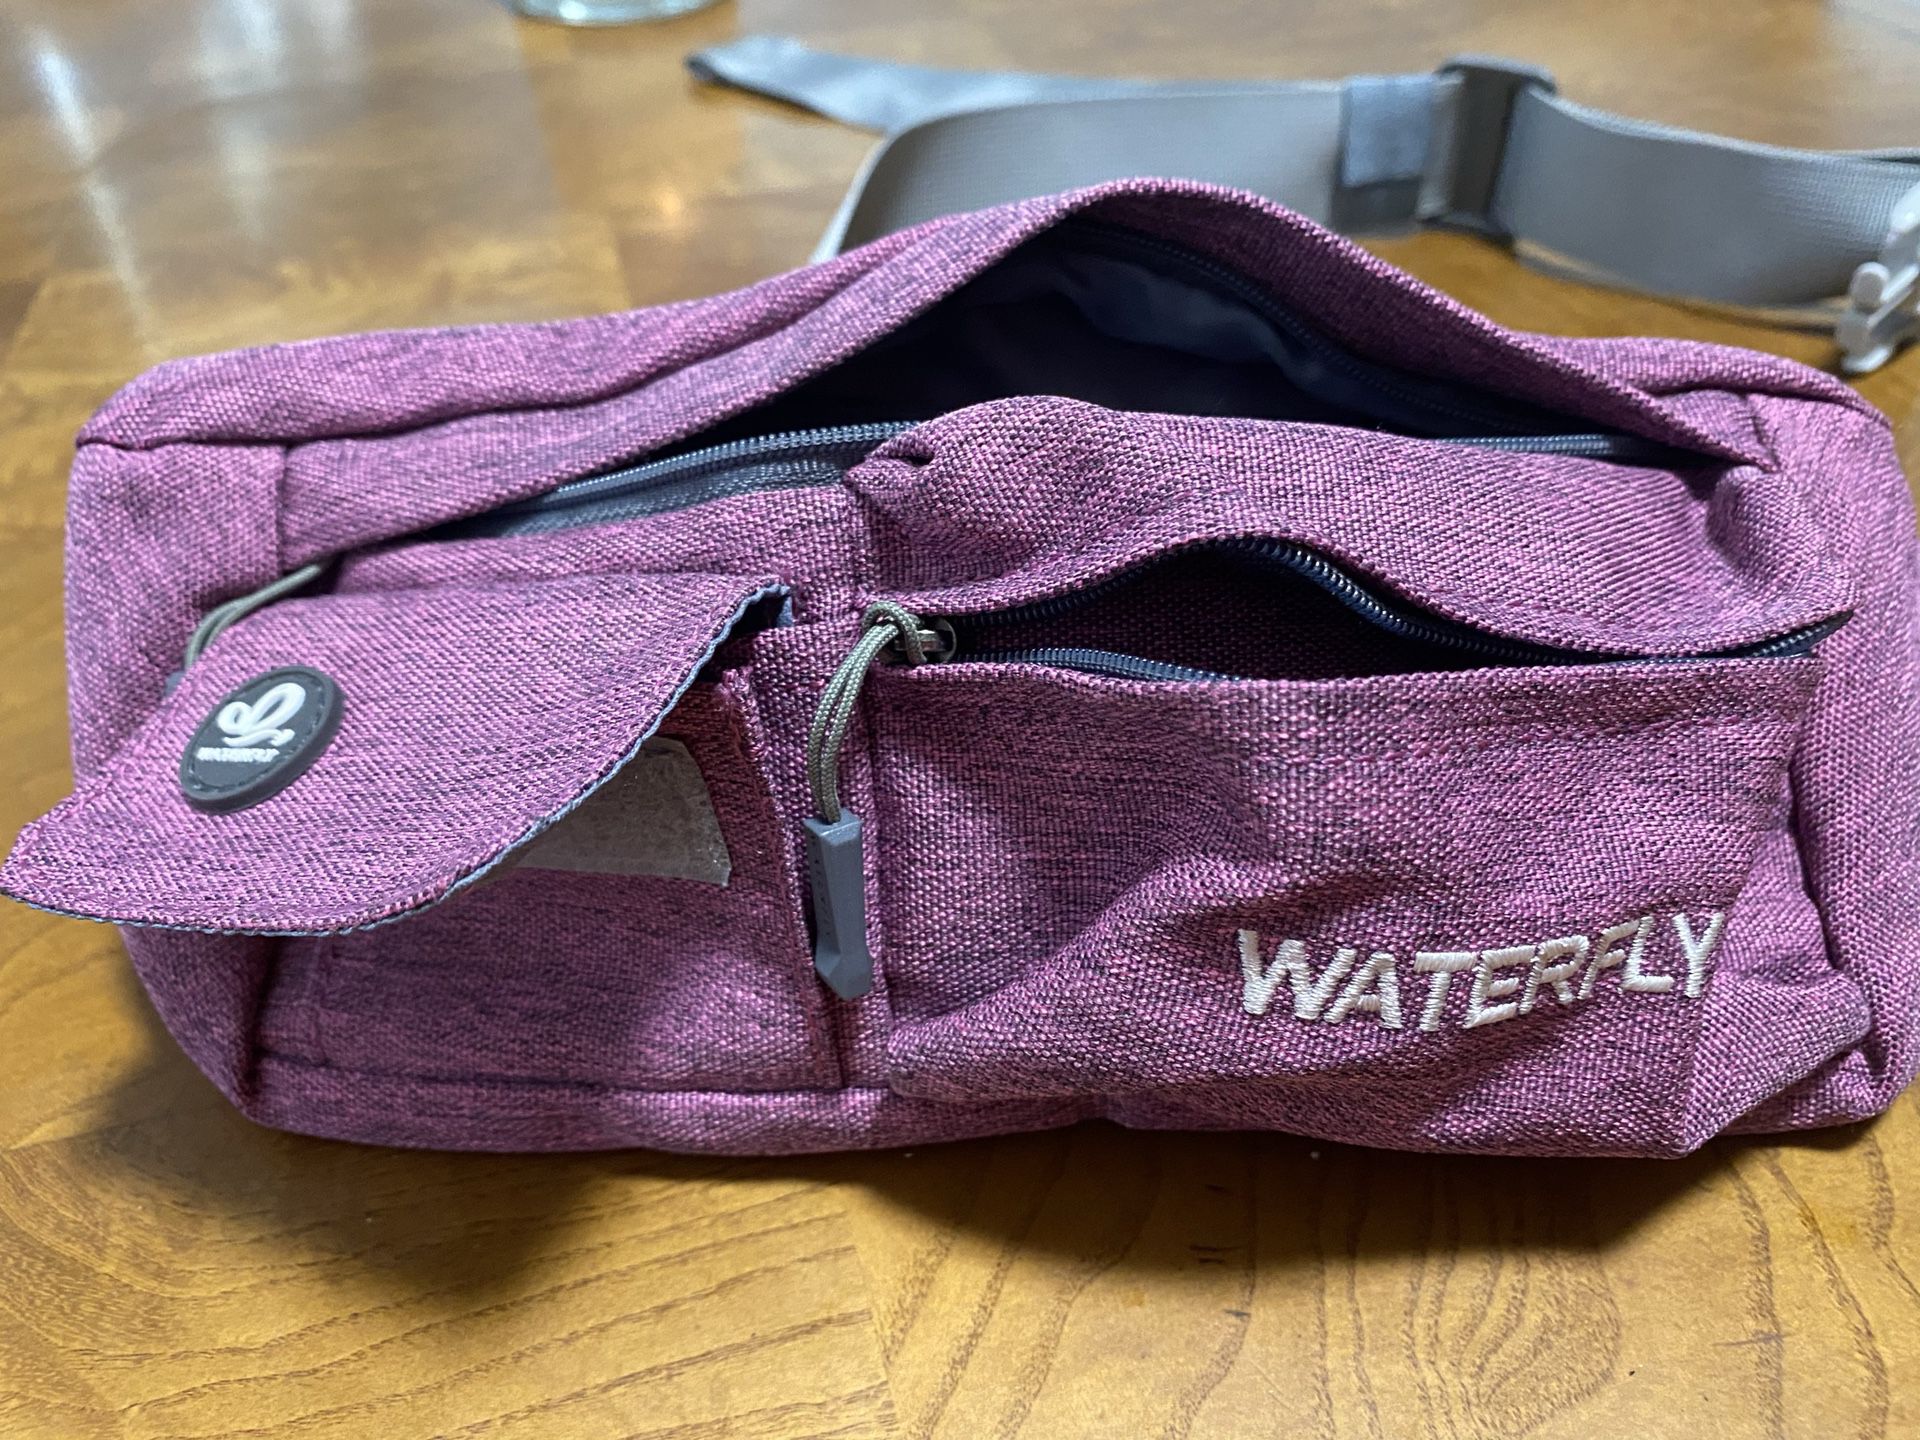 WATERFLY Fanny Pack Slim Soft Polyester Water Resistant Waist Bag Pack